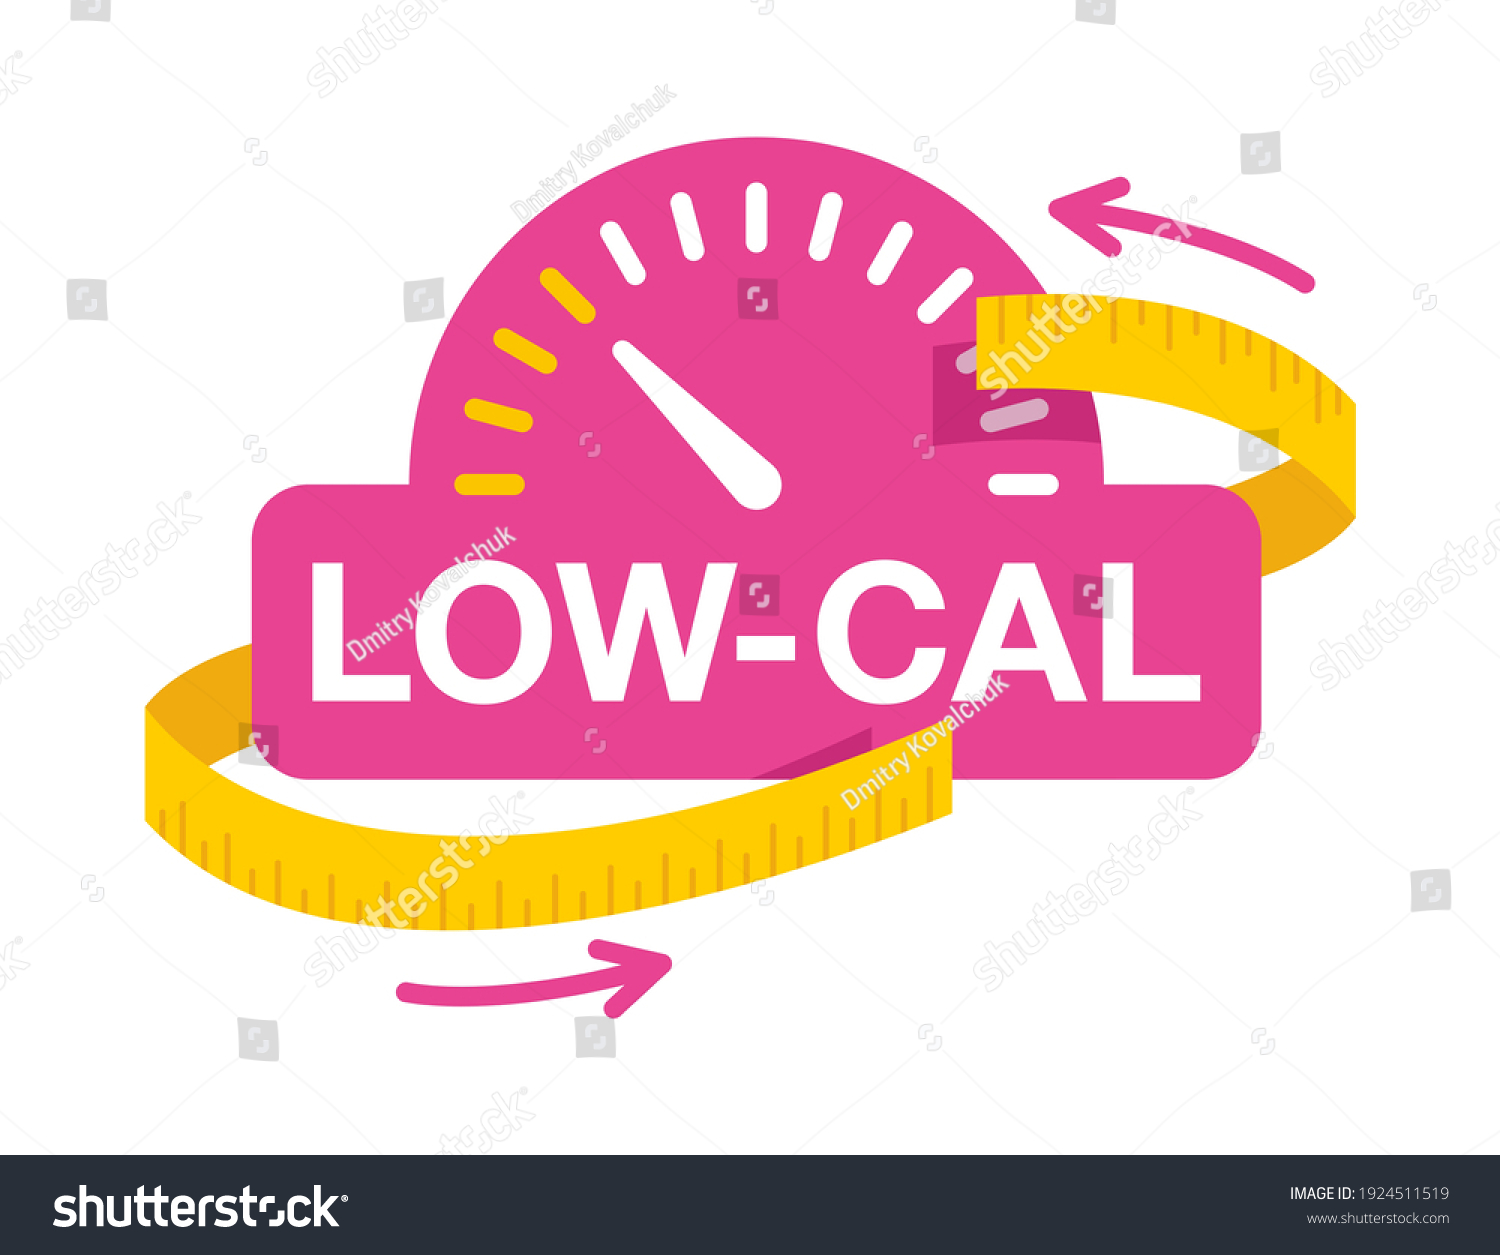 SVG of Low Cal pink icon - combination of measuring tape and weight scales - pictogram for dietary low-cal food products - isolated vector emblem svg